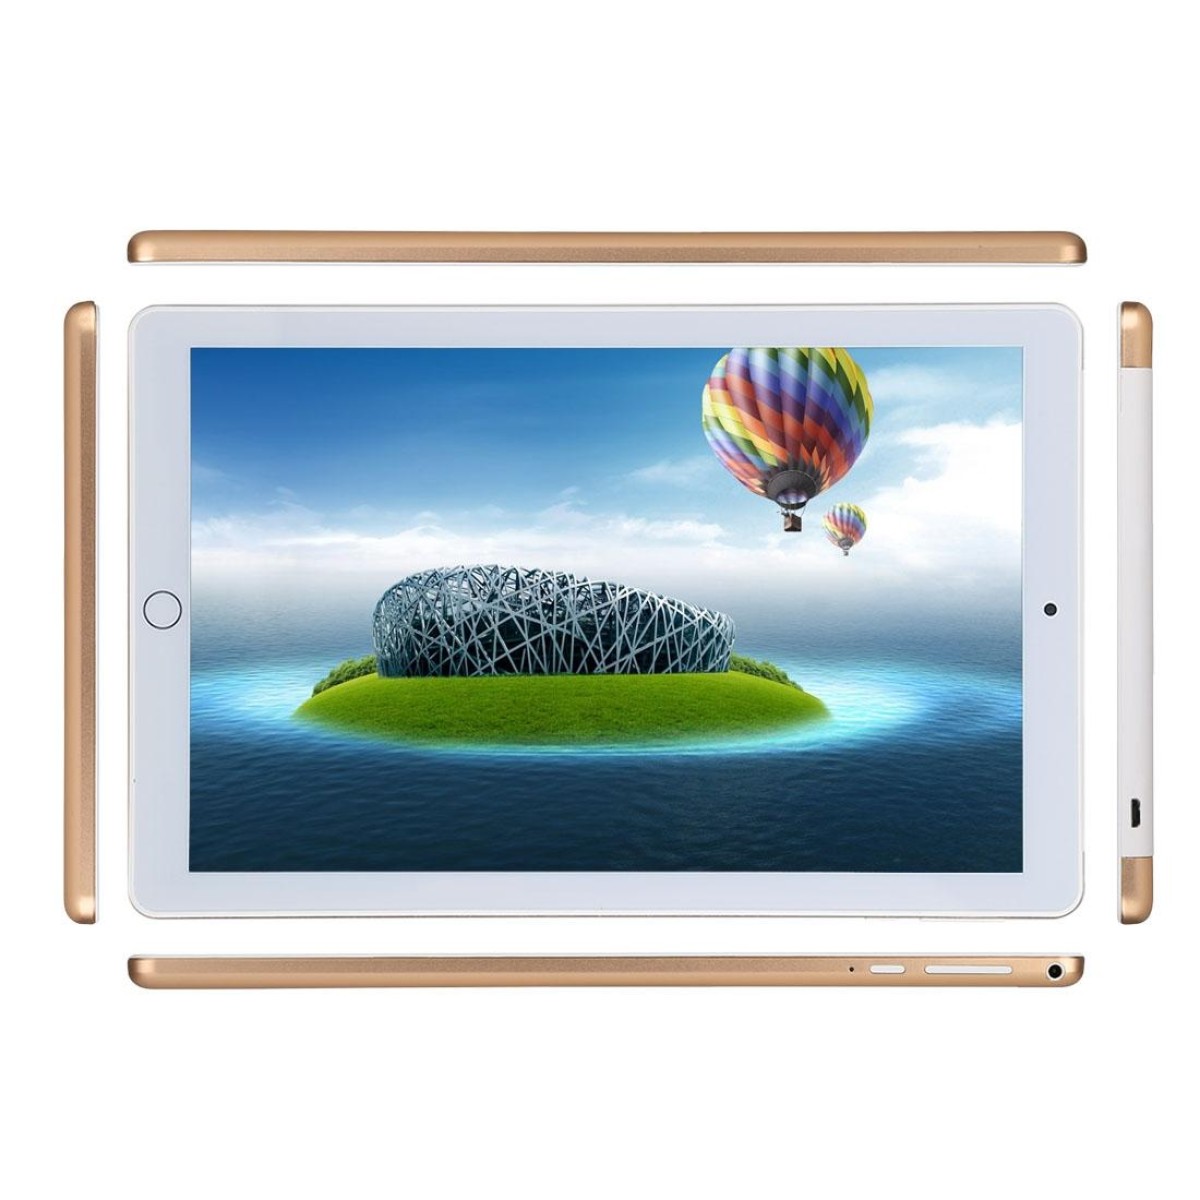 3G Phone Call Tablet PC, 10.1 inch, 2GB+32GB, Android 5.1 MTK6580 Quad Core 1.3GHz, Dual SIM, Support GPS, OTG, WiFi, Bluetooth(Gold)